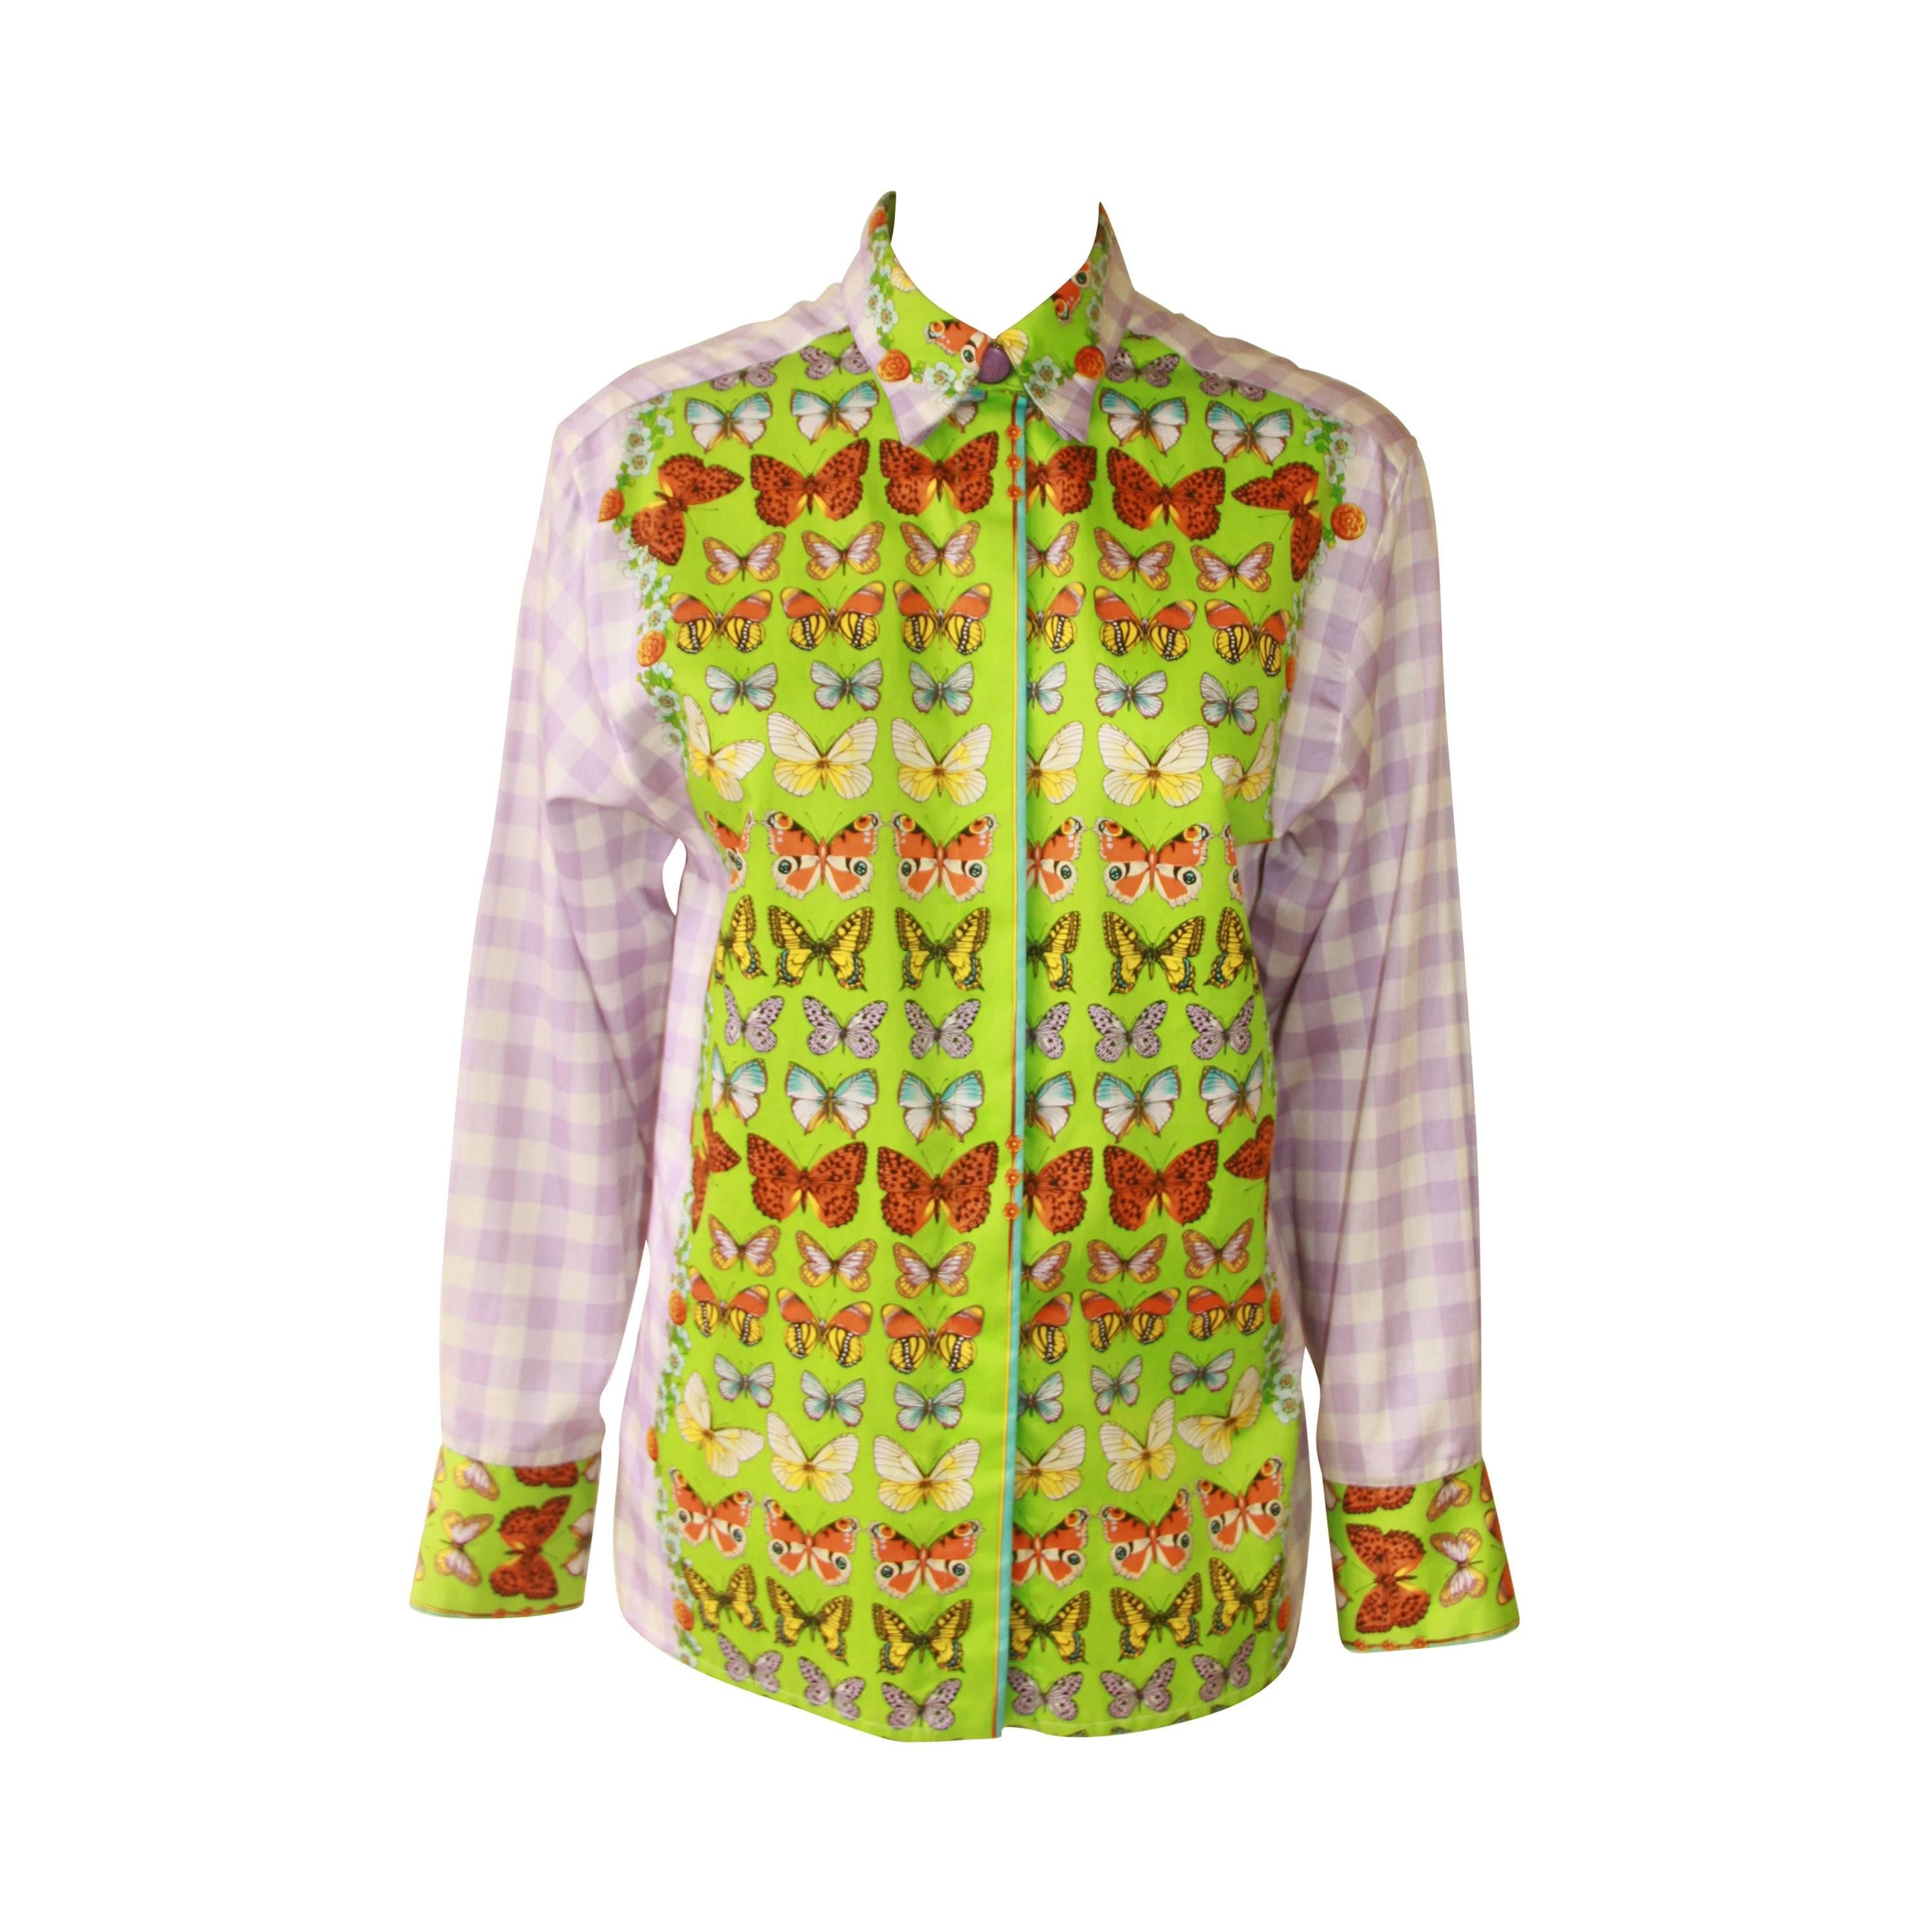 Gianni Versace Butterfly Checked Printed Shirt Spring 1995 For Sale